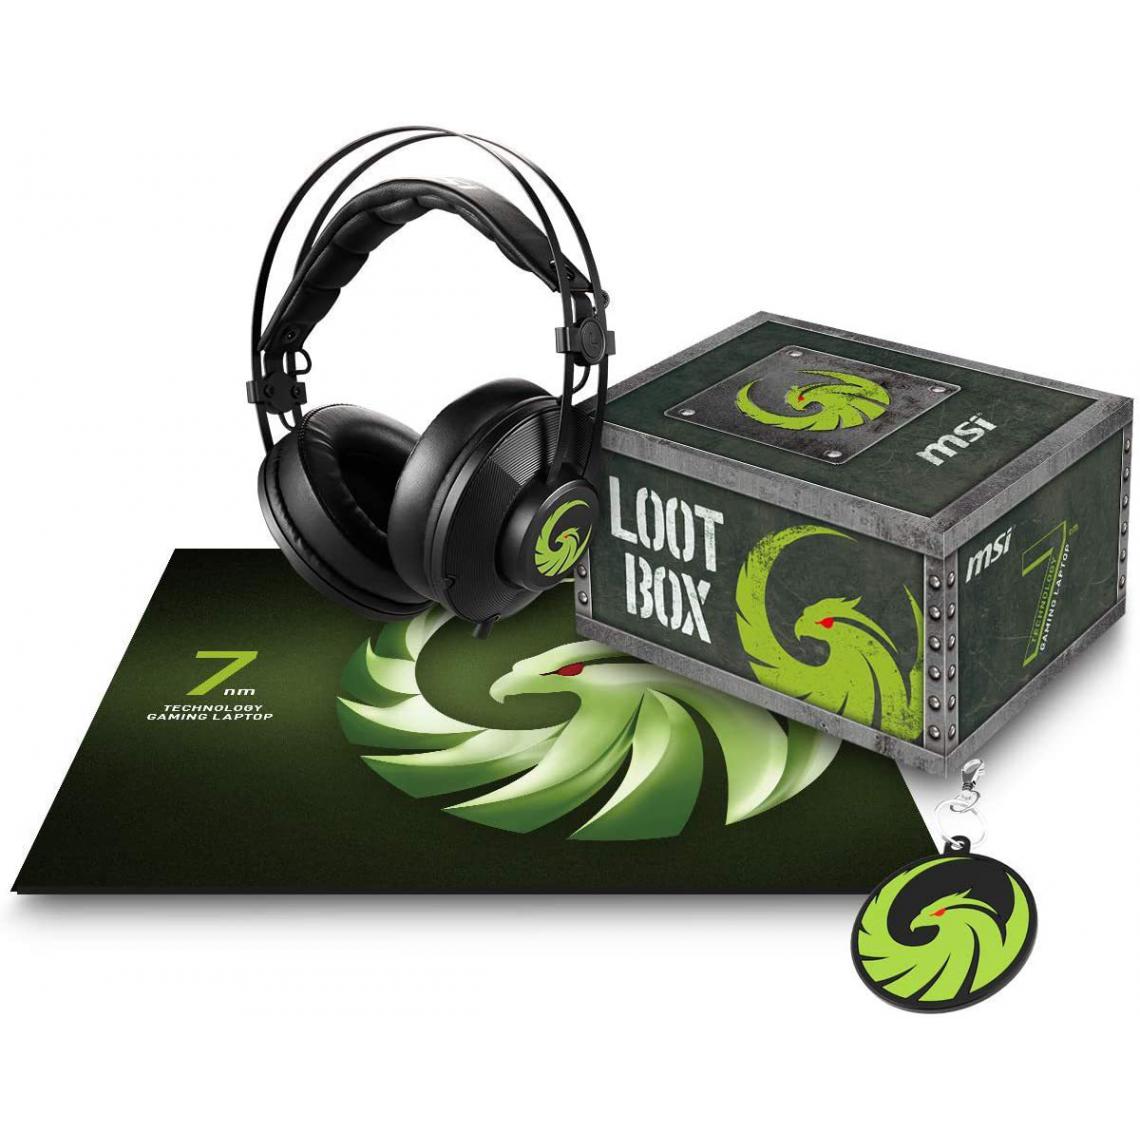 Msi - Accessoire MSI LOOTBOX Pack 2020 GT - Micro-Casque